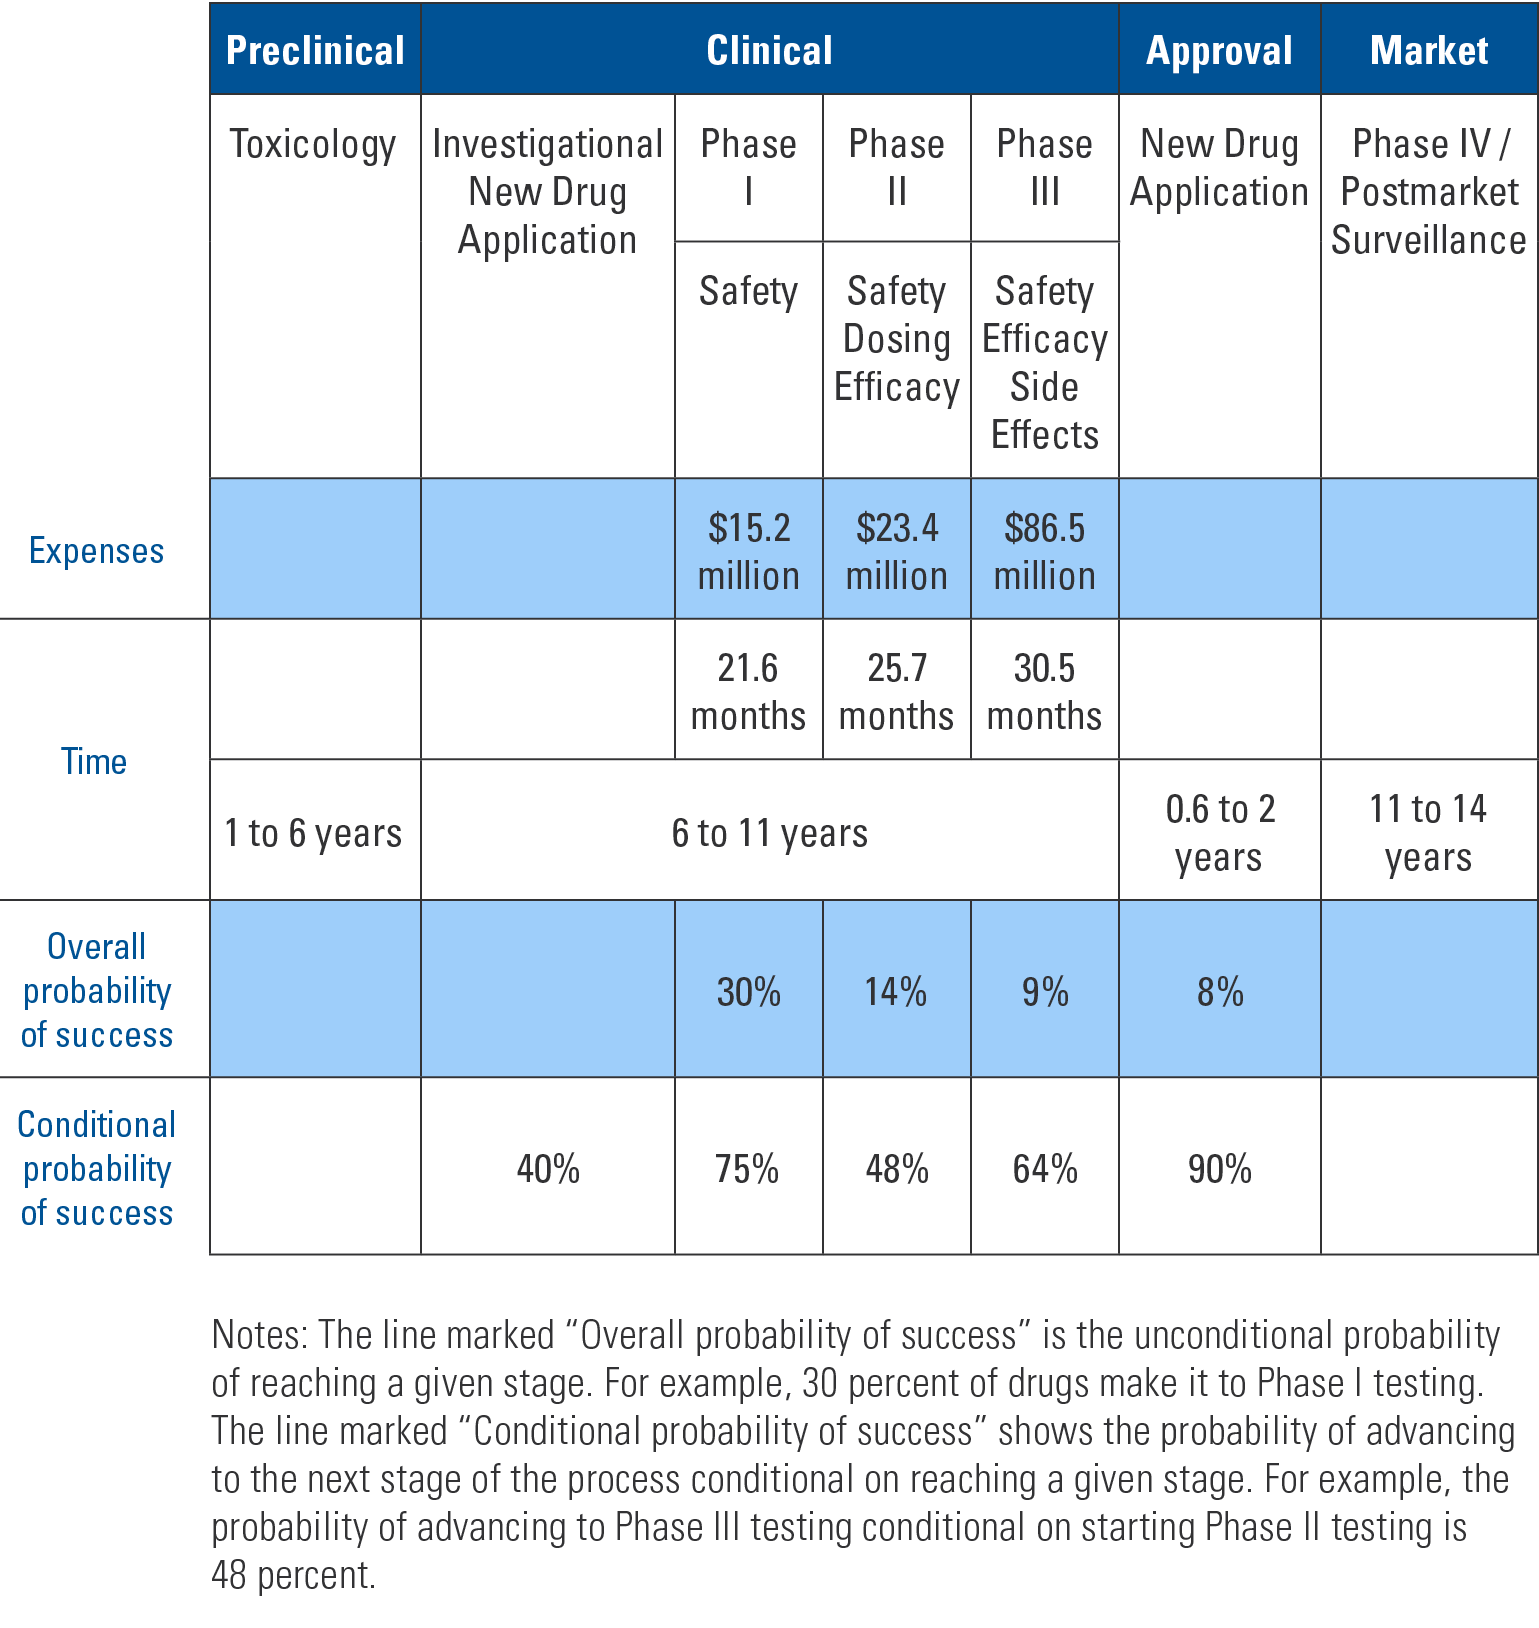 Table showing the FDA Drug Approval Process. Broken into Preclinical, Clinical, Approval and Market phases highlighting expenses, time, overall probability of success and conditional probability of success.